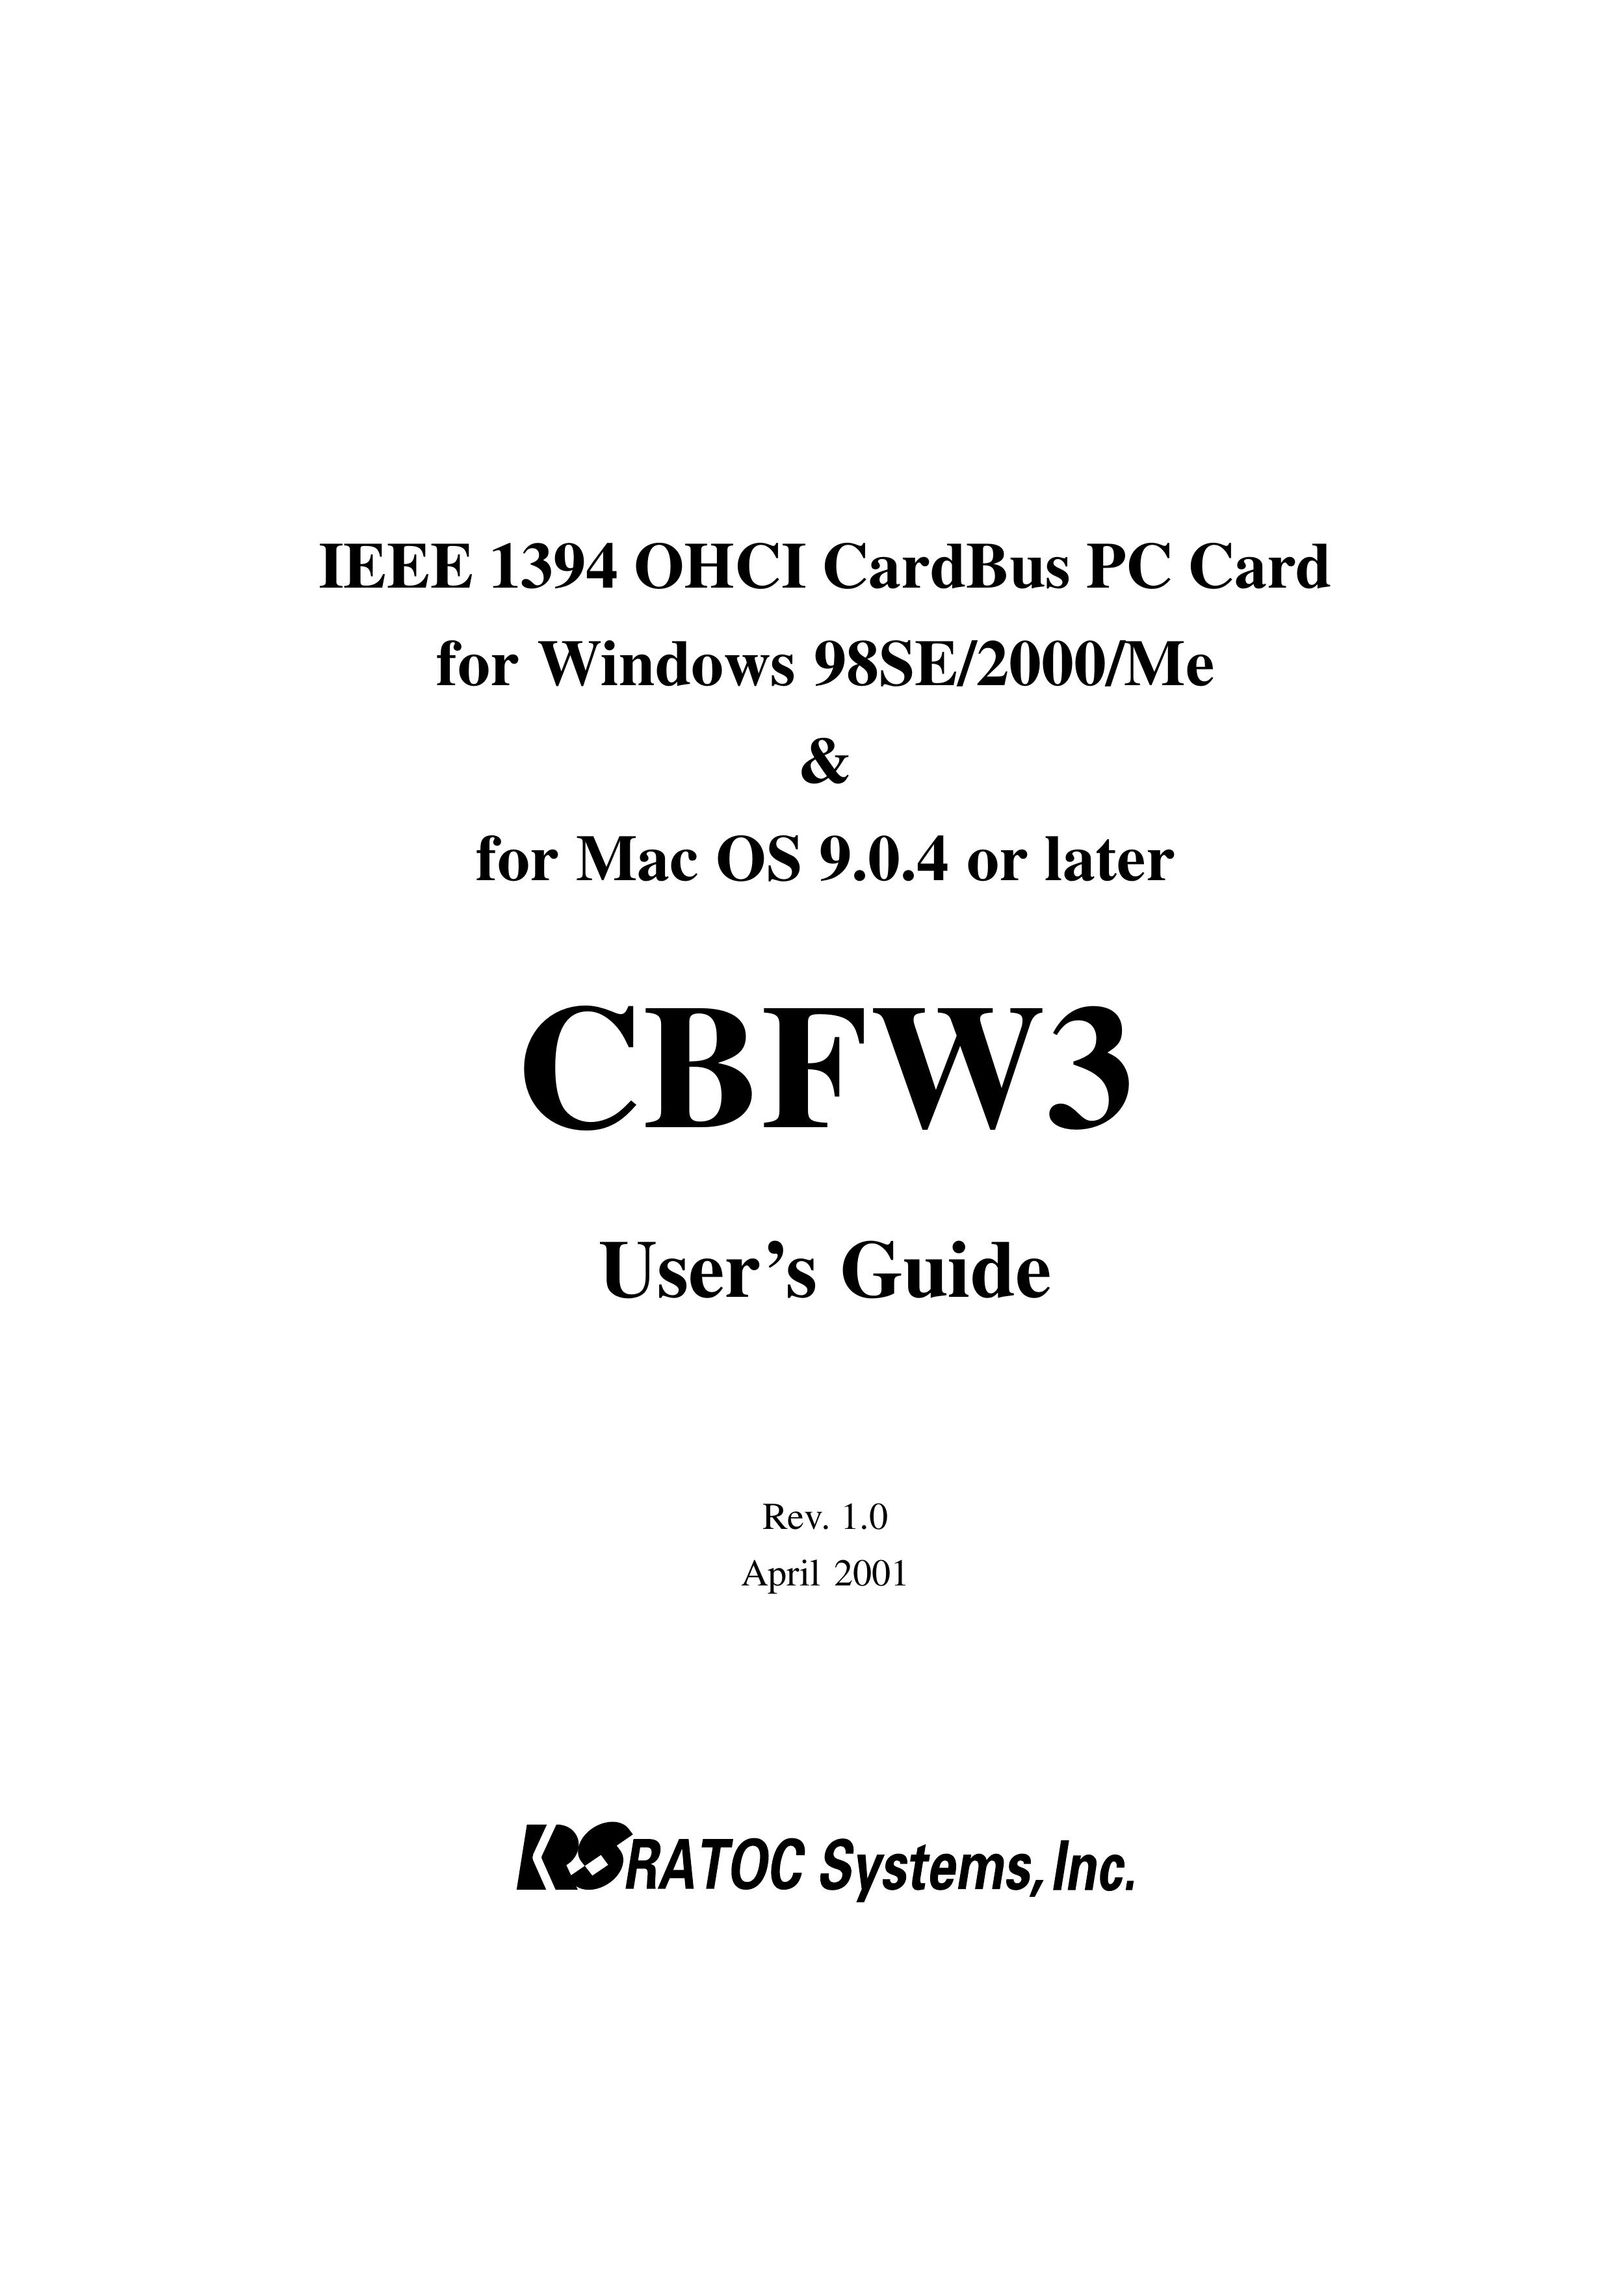 Ratoc Systems CBFW3 Network Card User Manual